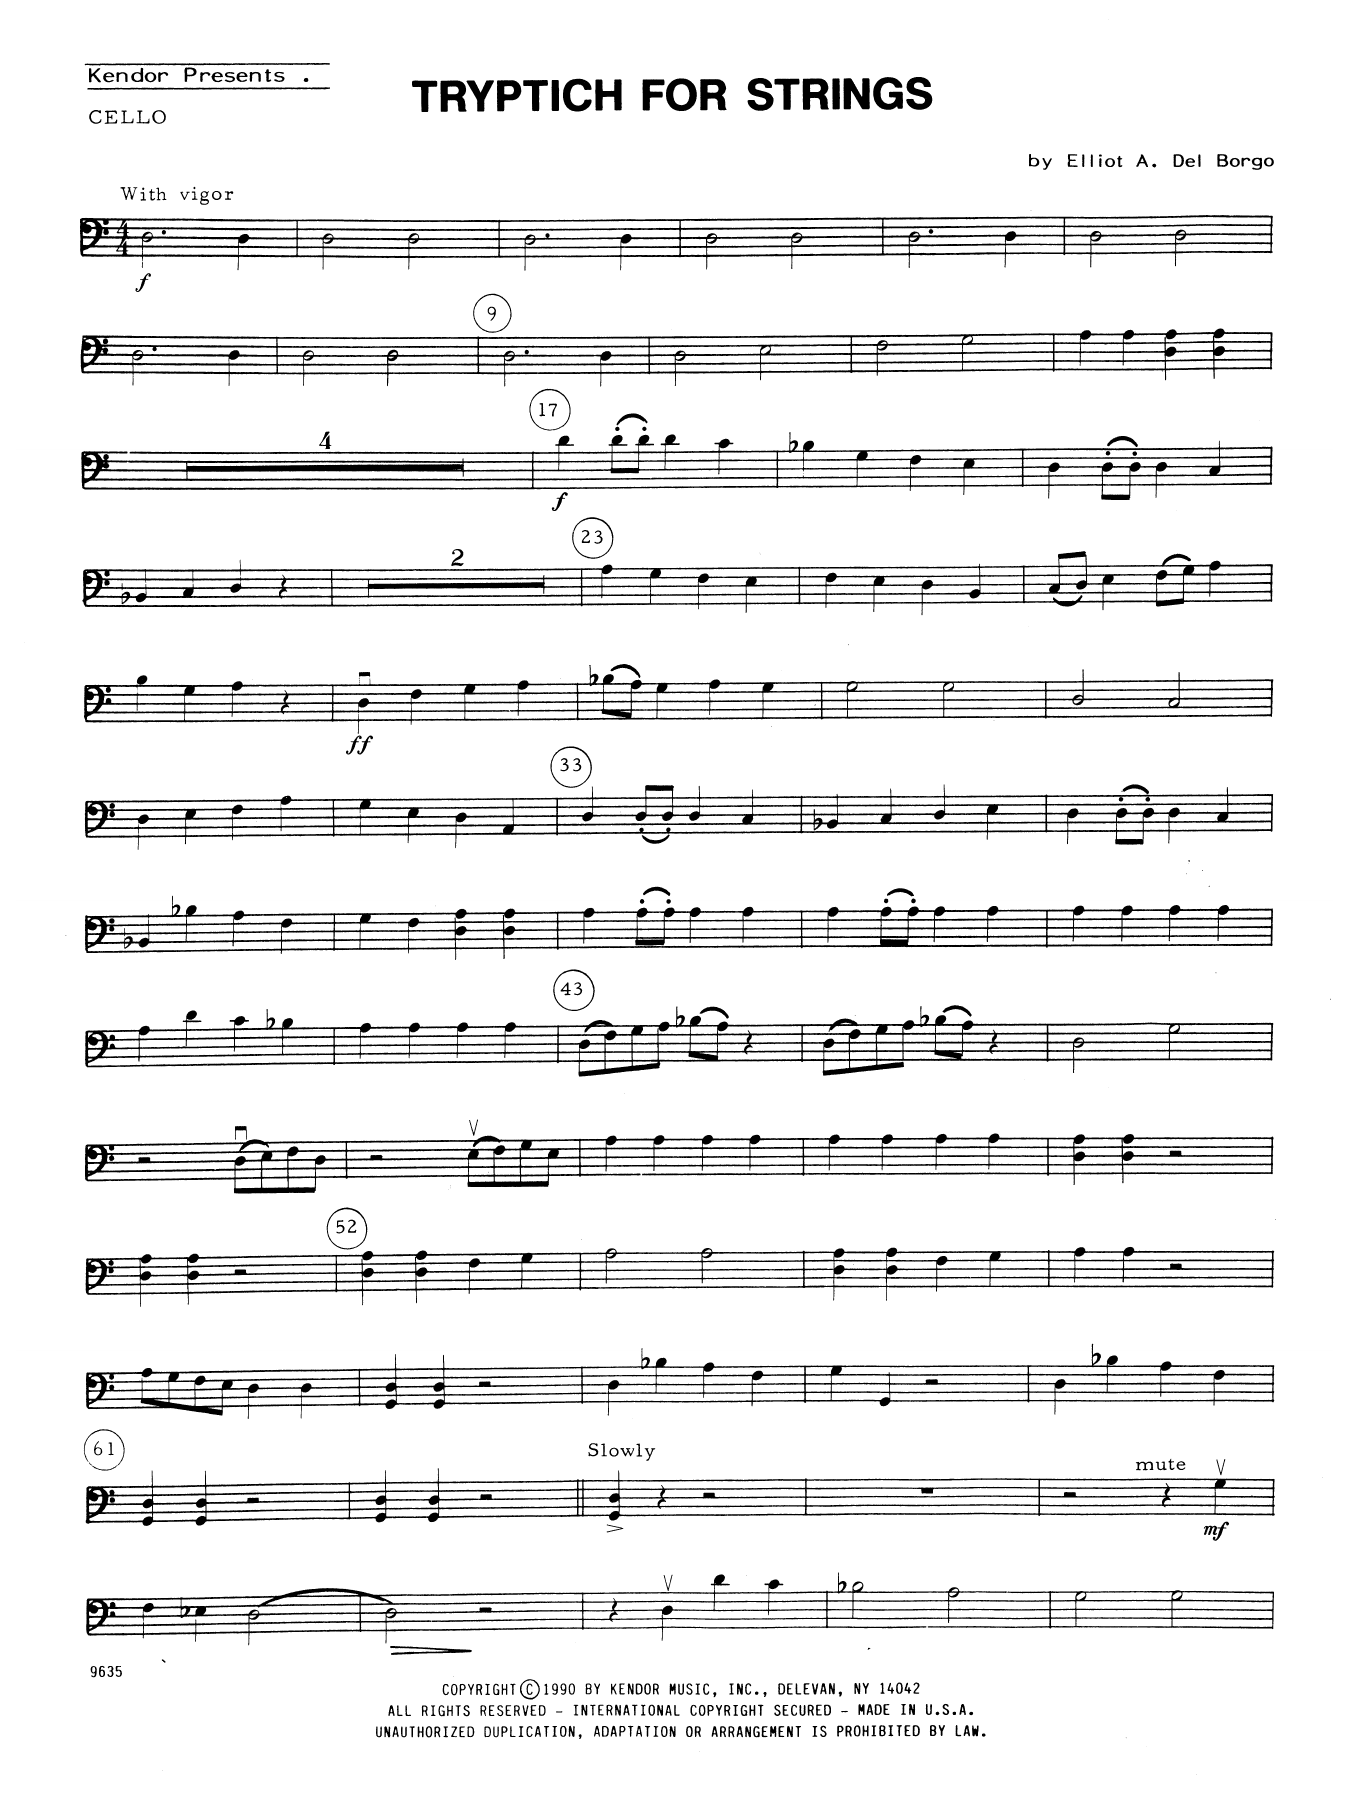 Download Elliot A. Del Borgo Tryptich For Strings - Cello Sheet Music